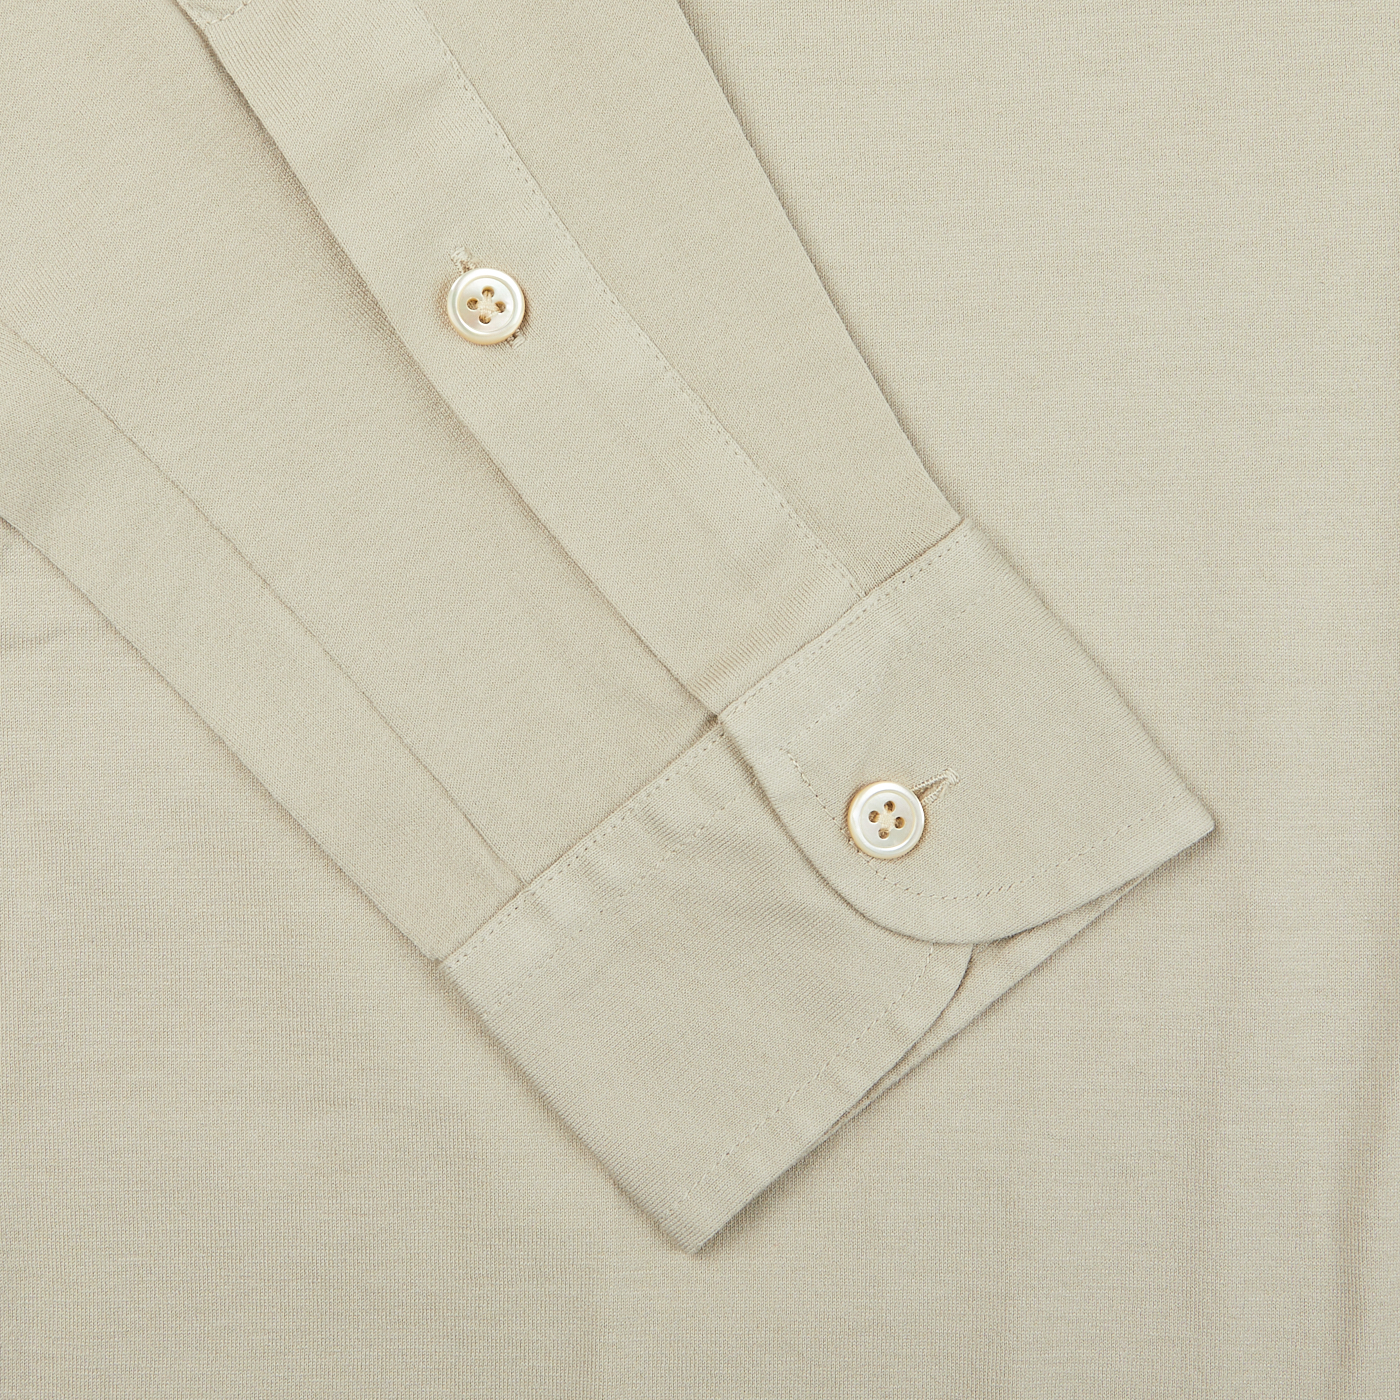 A close up of a Filippo de Laurentiis Ciottollo Beige Cotton Jersey Knitted Shirt with buttons.